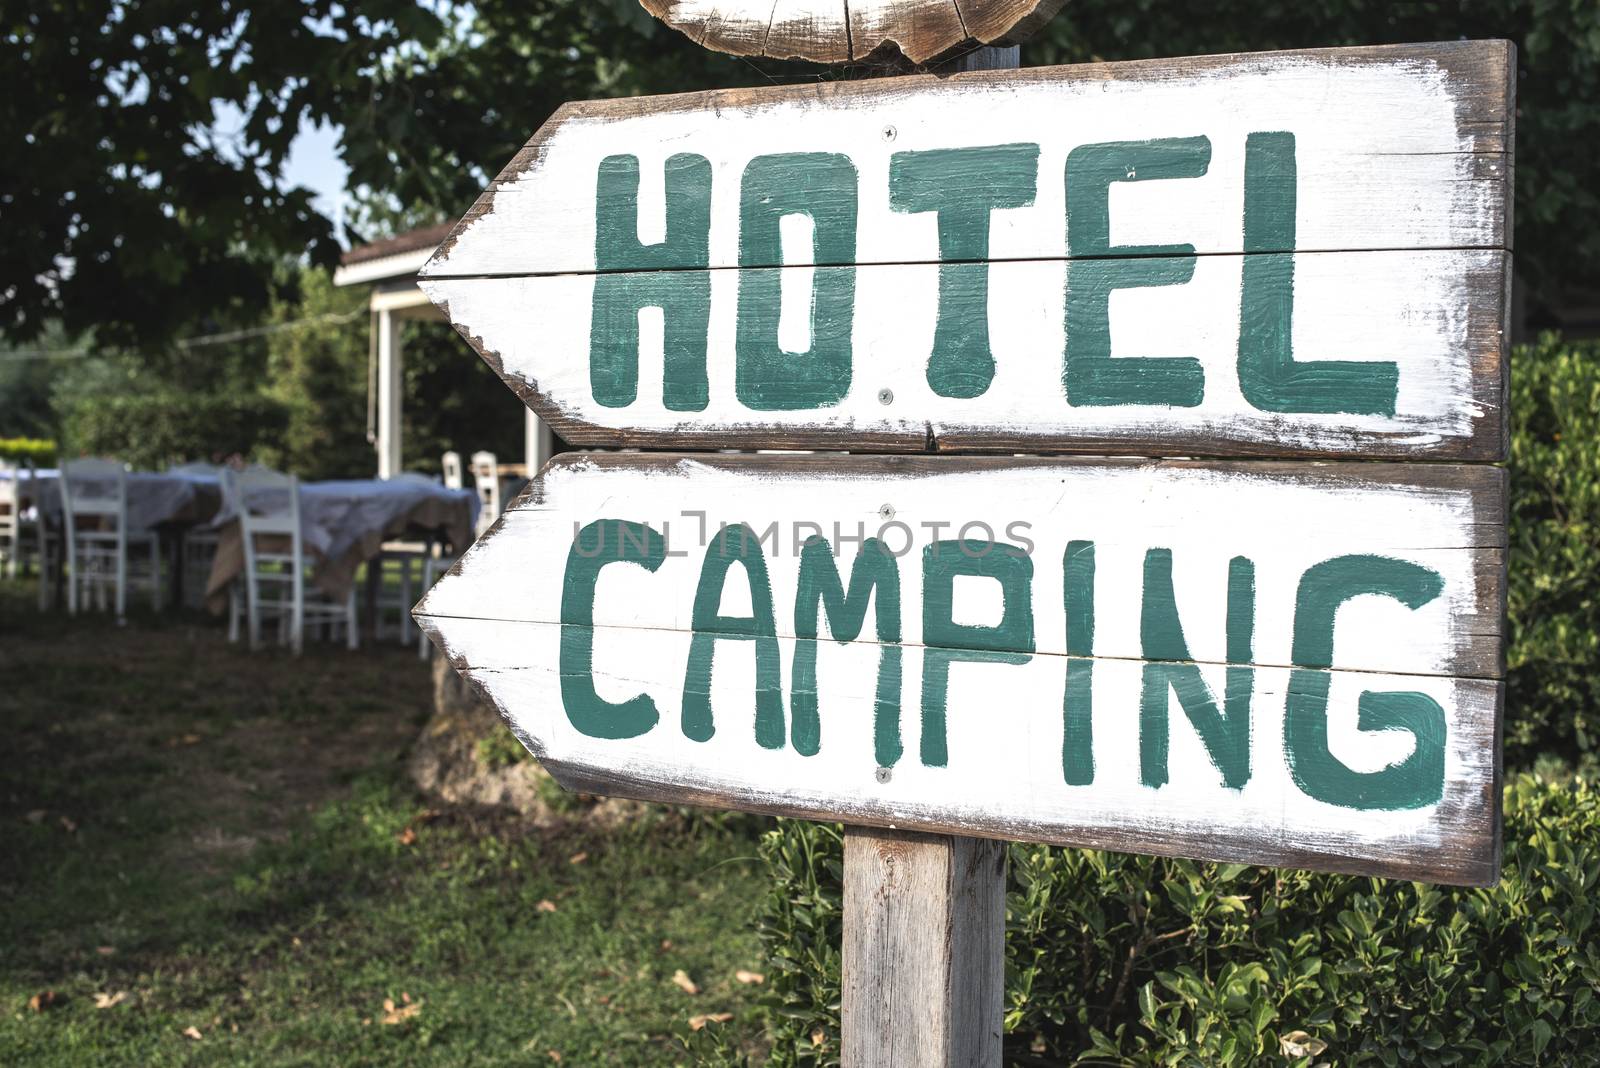 Hotel camping wooden signboard